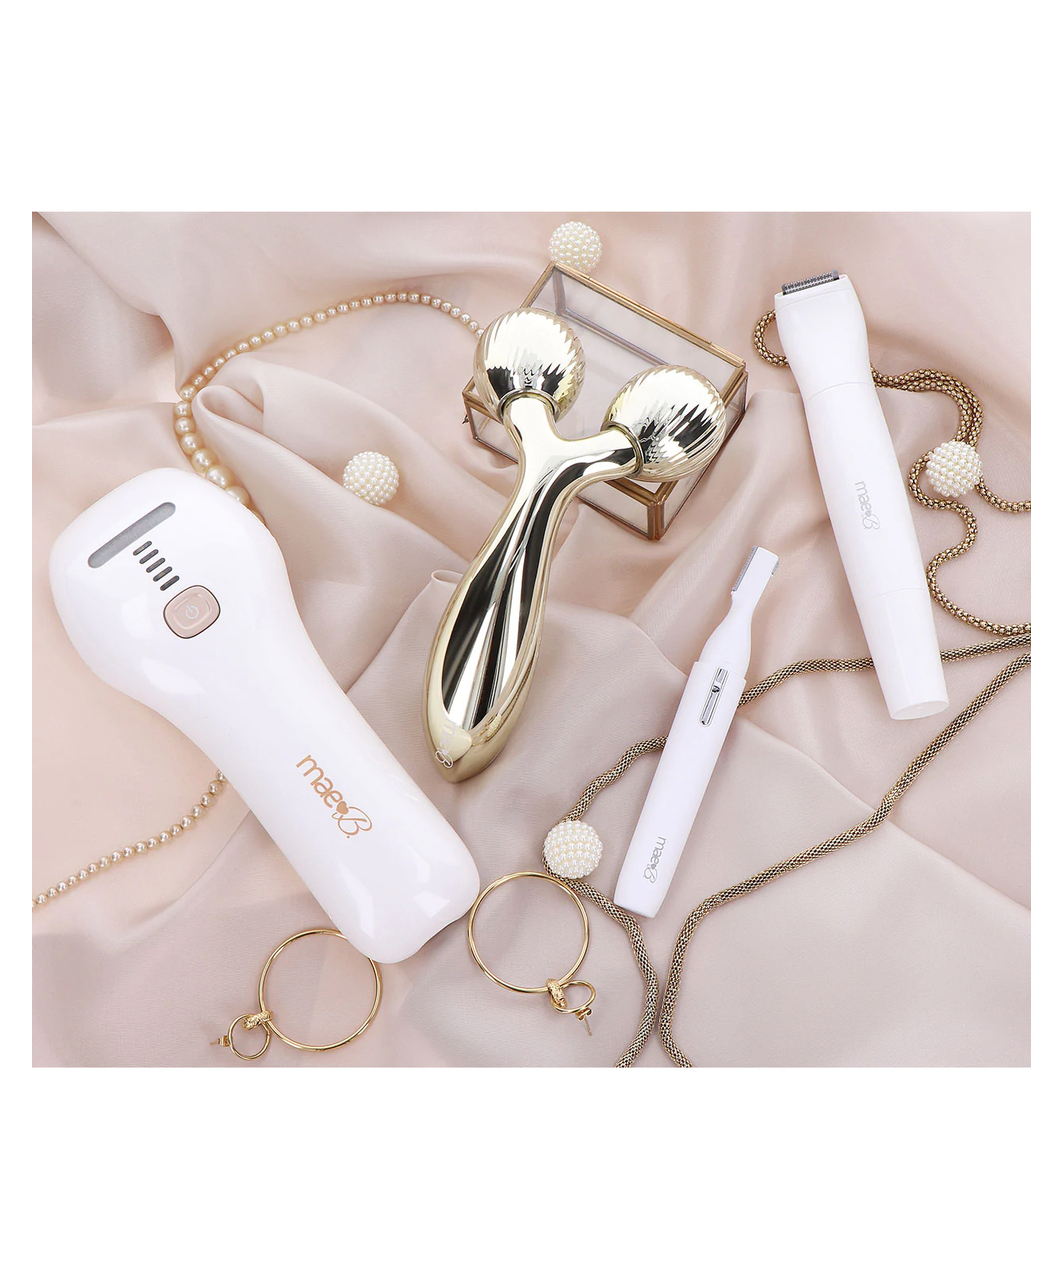 Intimate Health All-in-One Ladyshave